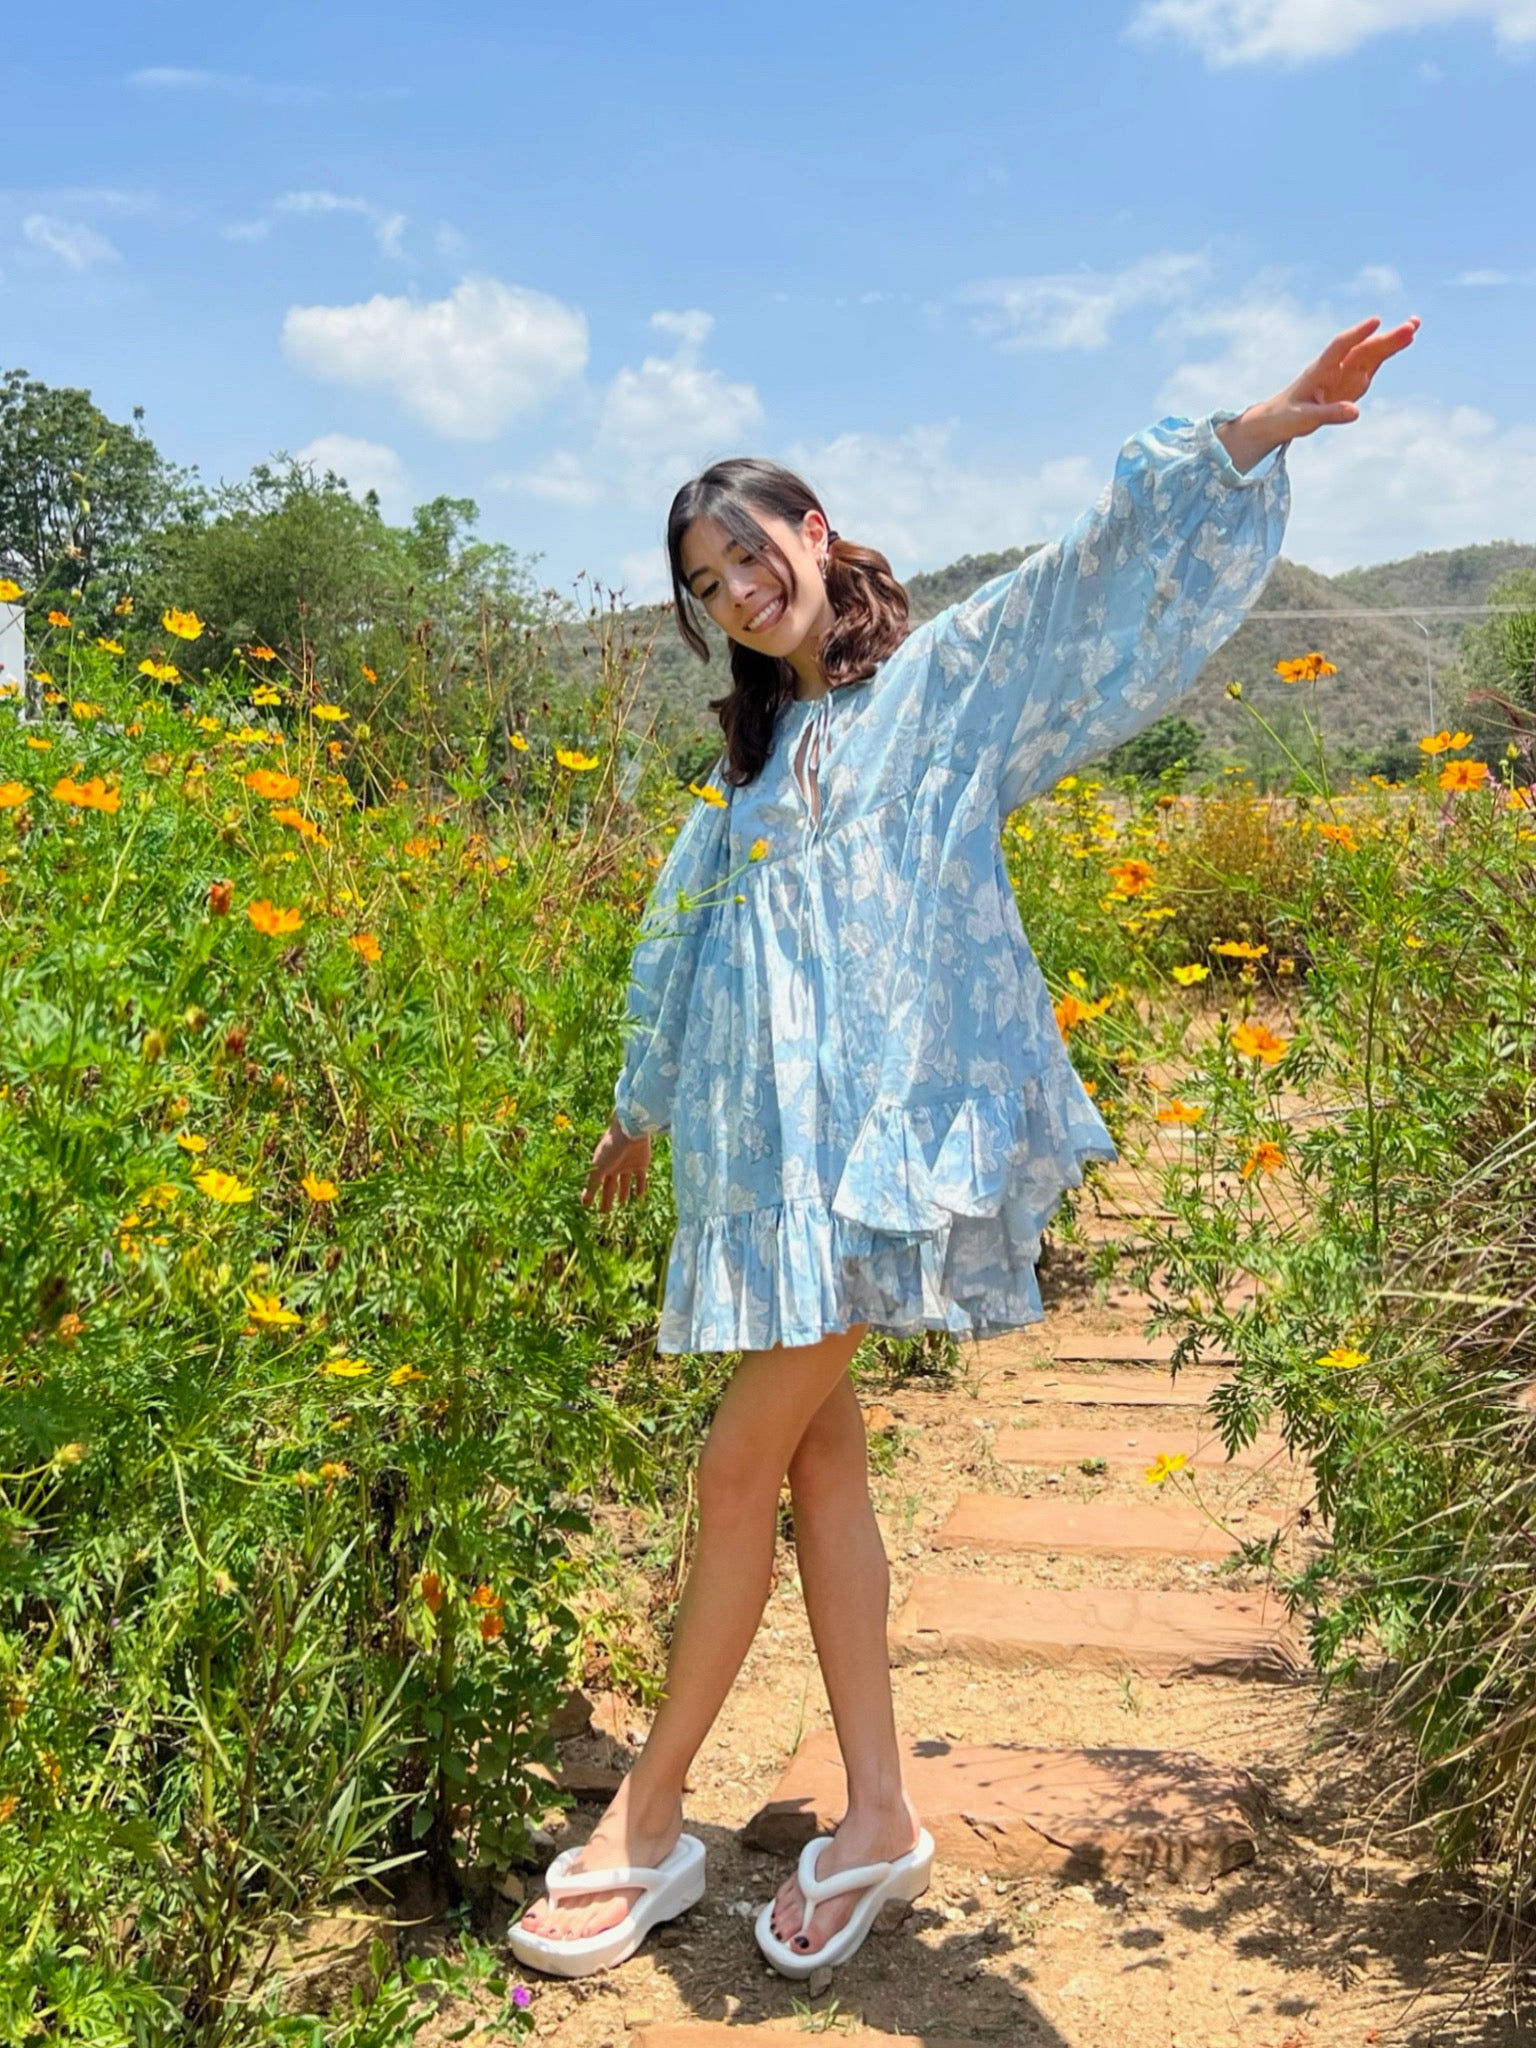 Discover Coco de Chom the Lola Bohemian Mini Dress in Beautiful Blue Sky: A Truly Unique Limited Edition Piece. Lola's Captivating Design is Handcrafted Using Wooden Blocks on Fine Cotton Voile, Featuring a Dreamy Block Printed Pattern Inspired by Bougainvillea Flowers and Vacations. Perfect for Beach Days, Vacations, and Boho Lovers.